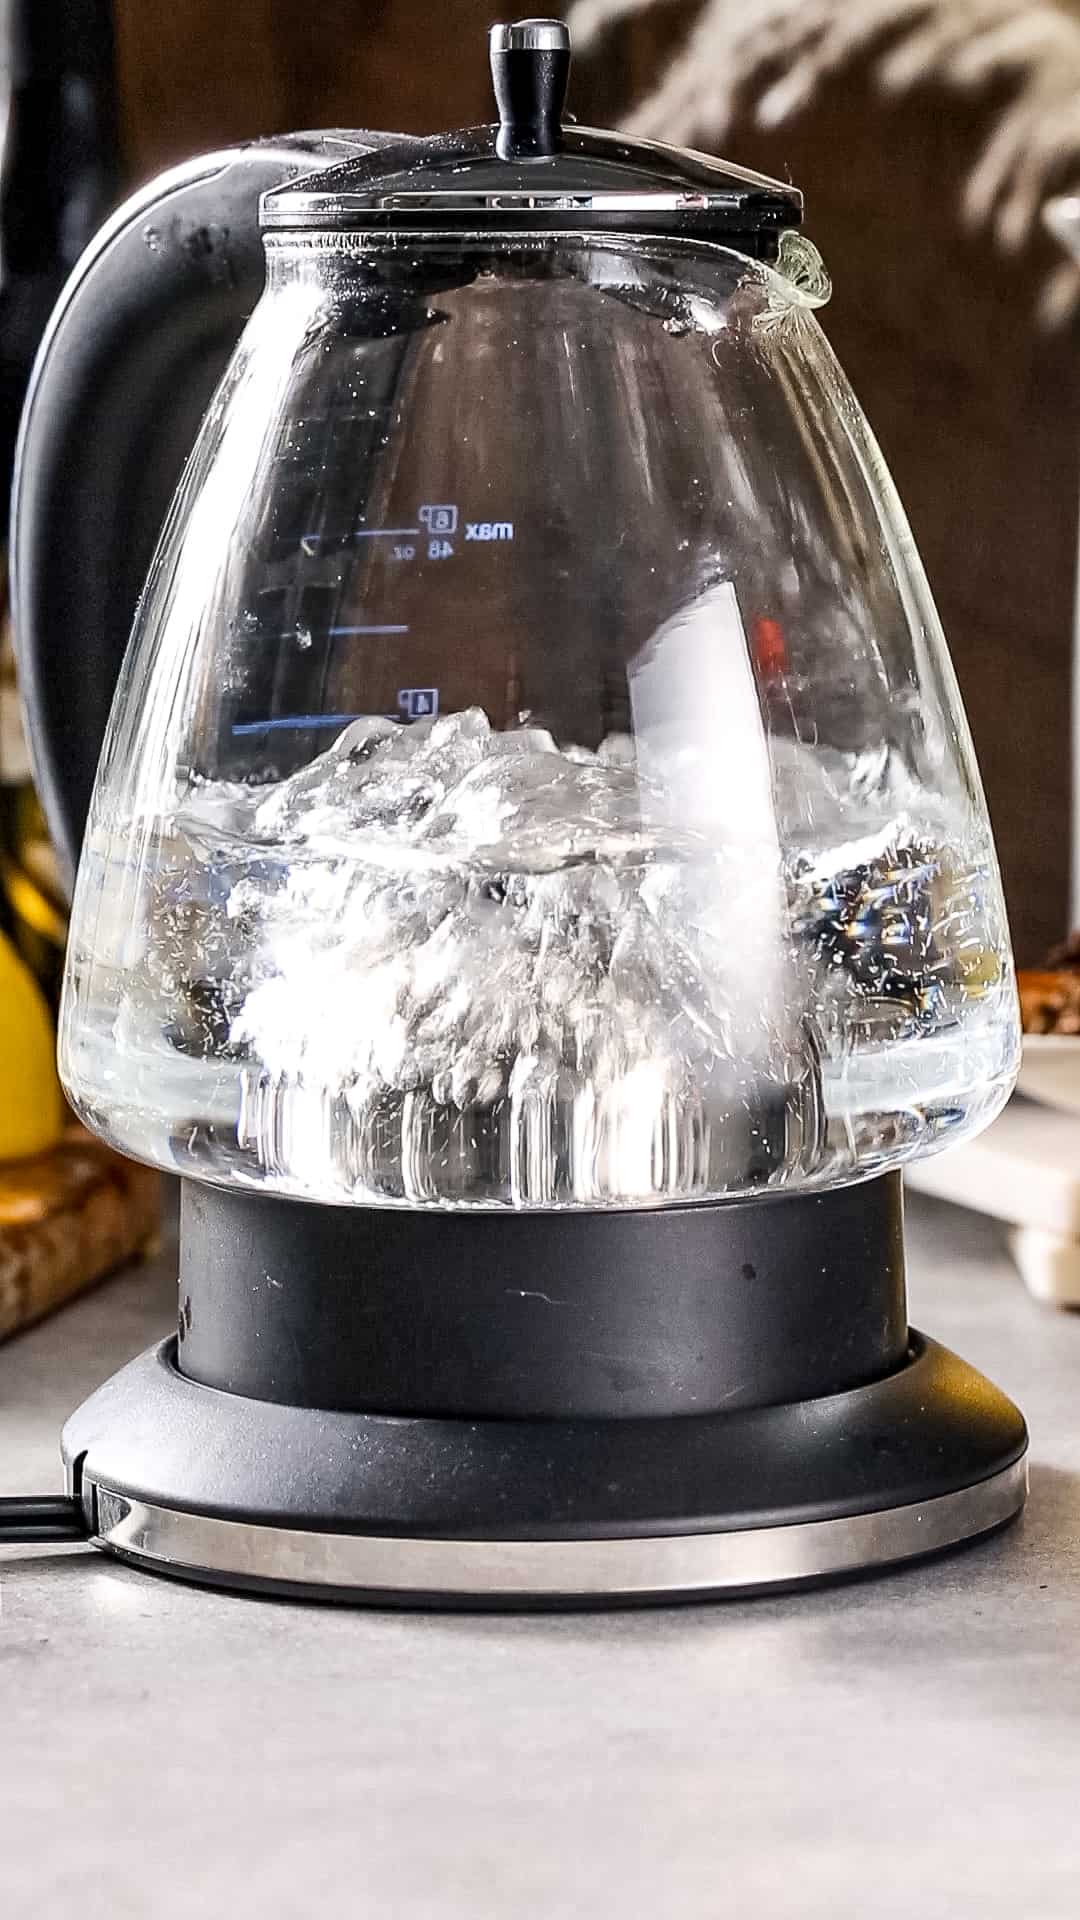 Water boiling in a glass electric kettle.